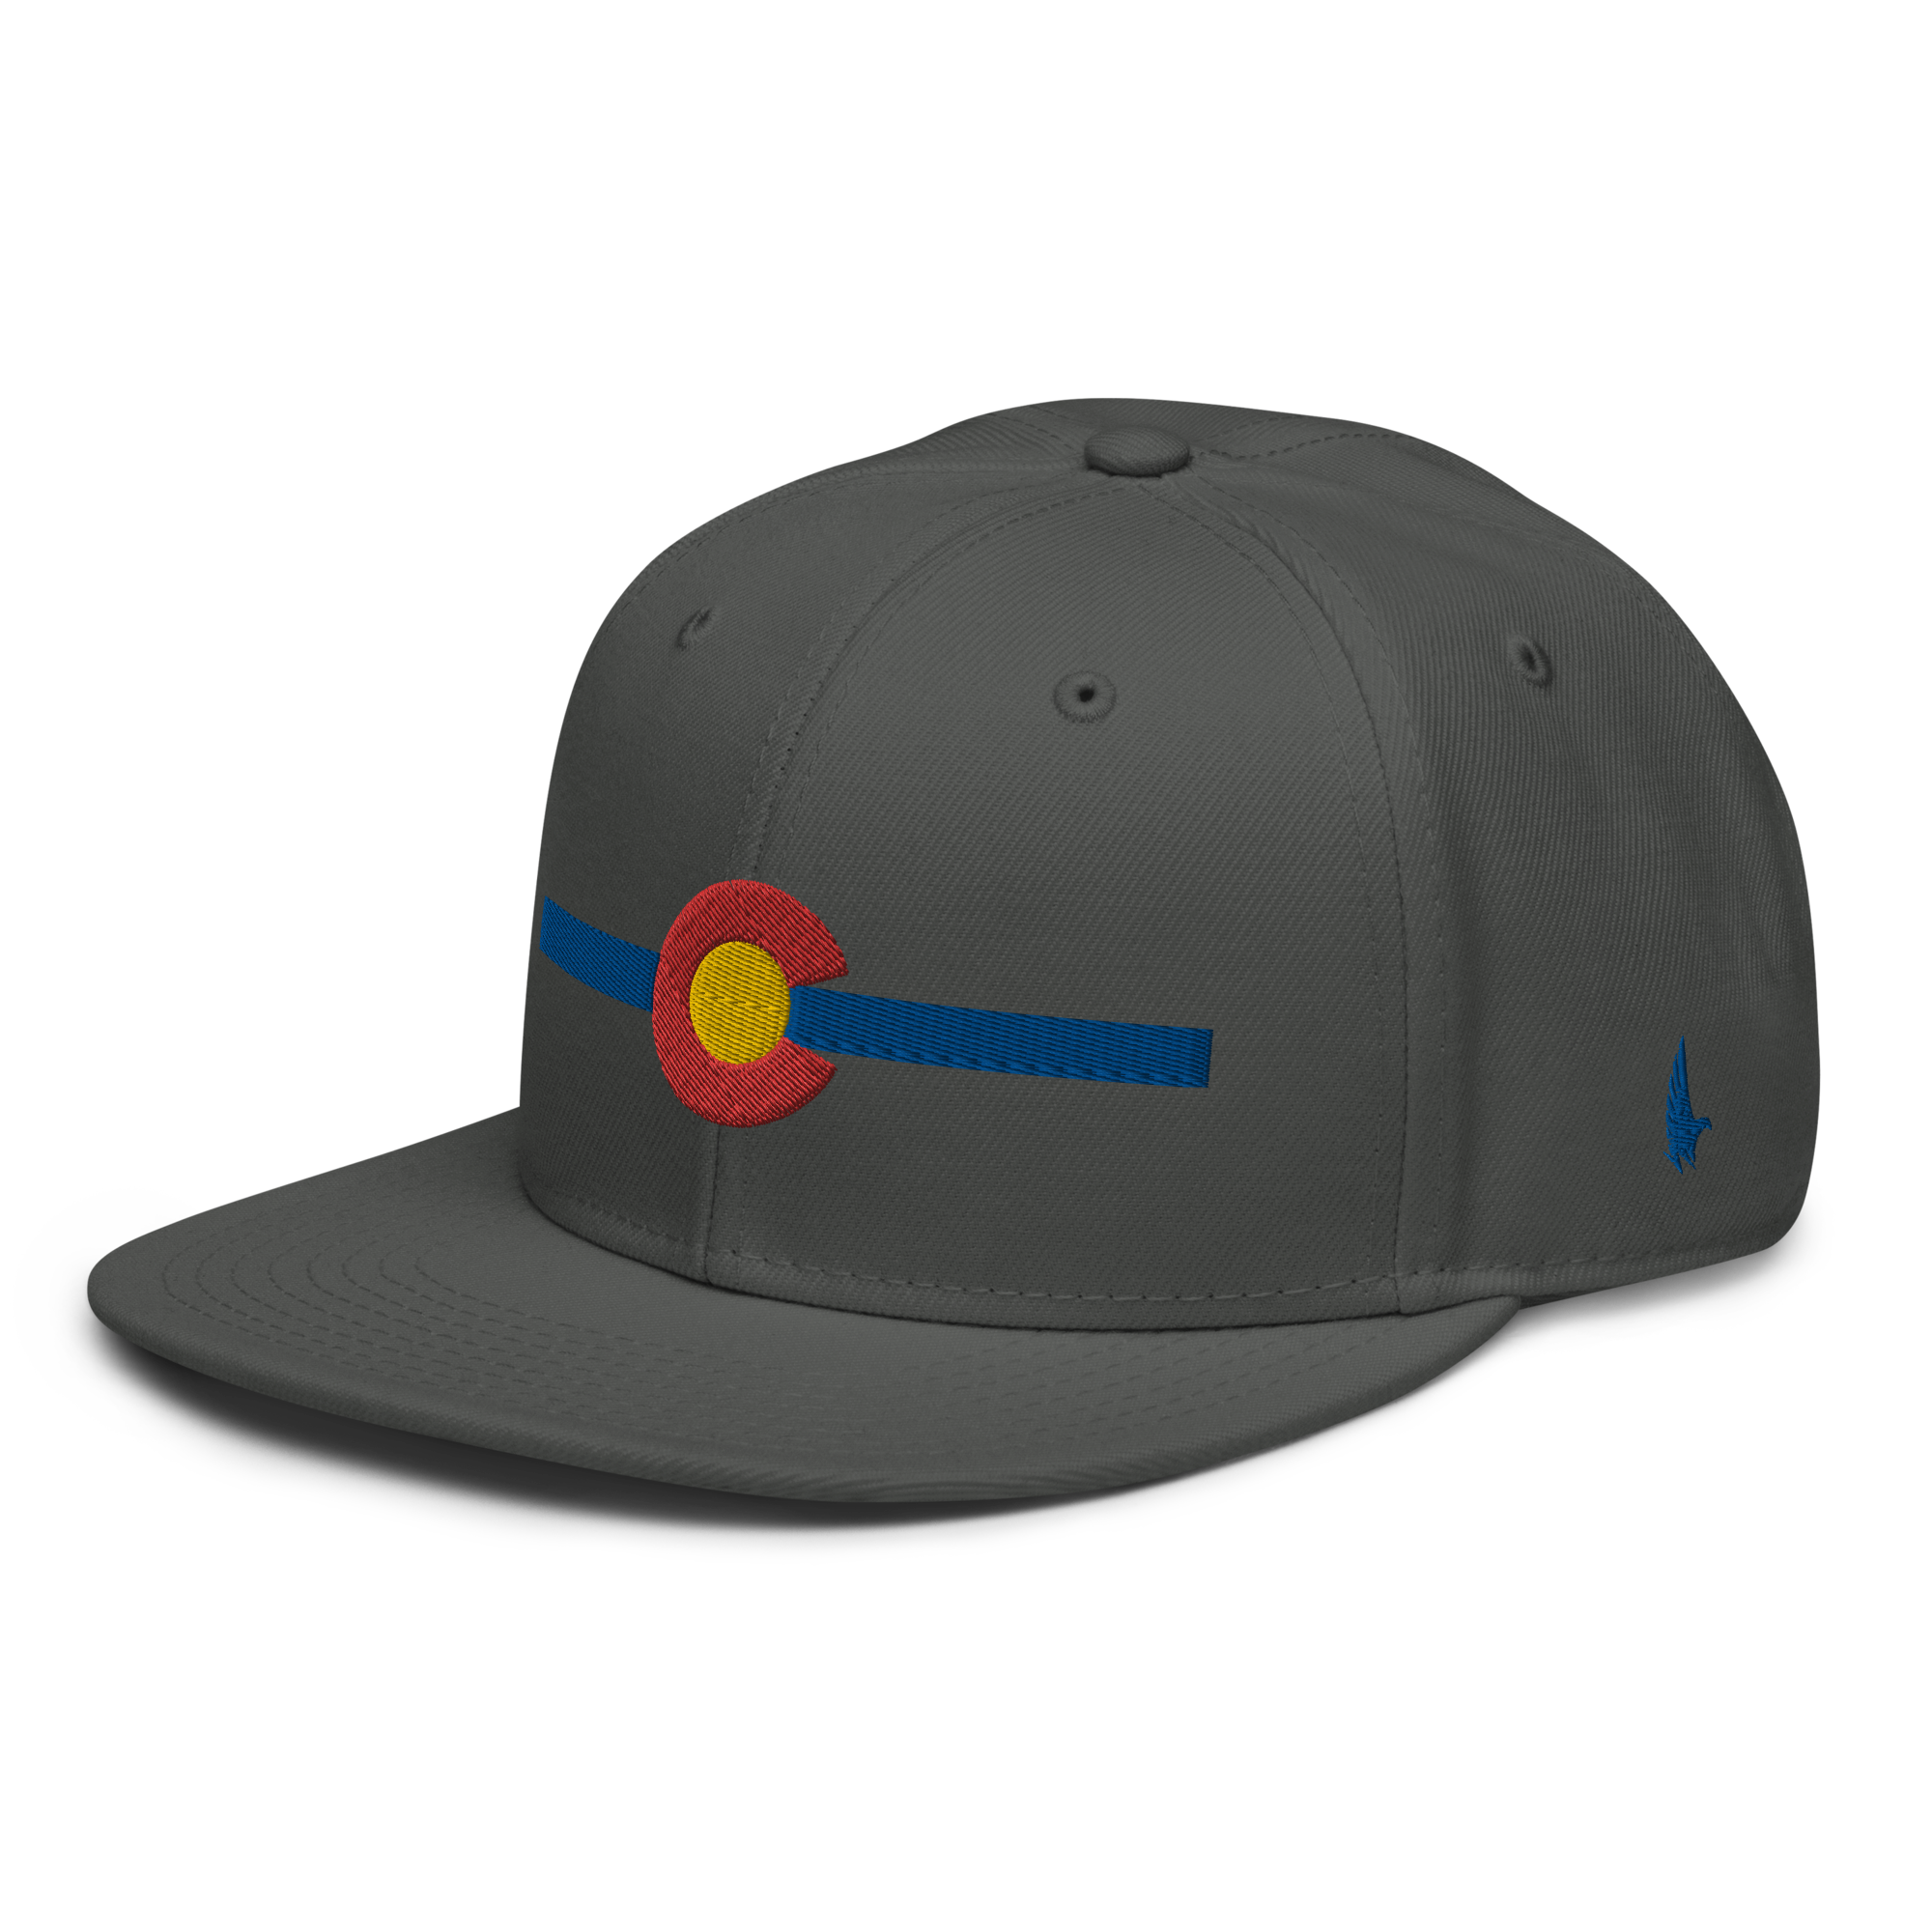 Classic Colorado Snapback Hat Charcoal Gray Blue OS - Loyalty Vibes